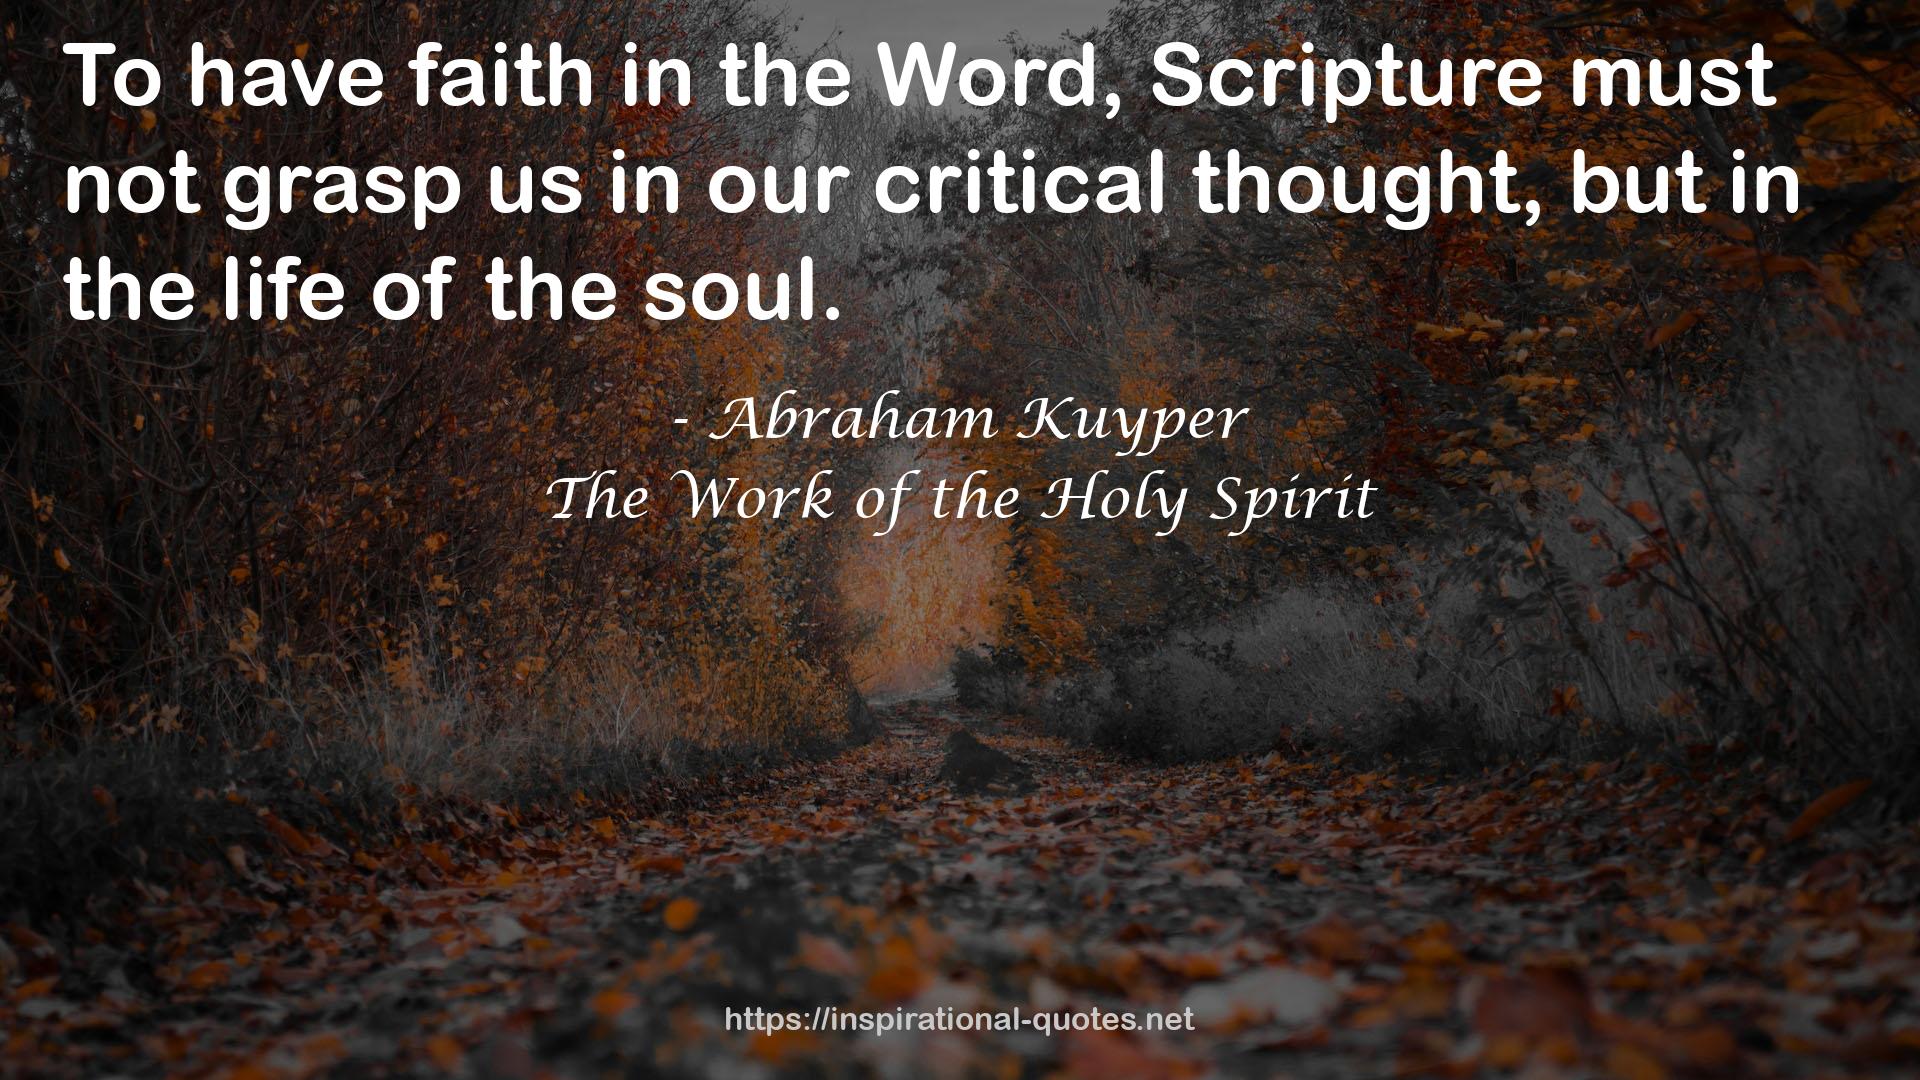 The Work of the Holy Spirit QUOTES